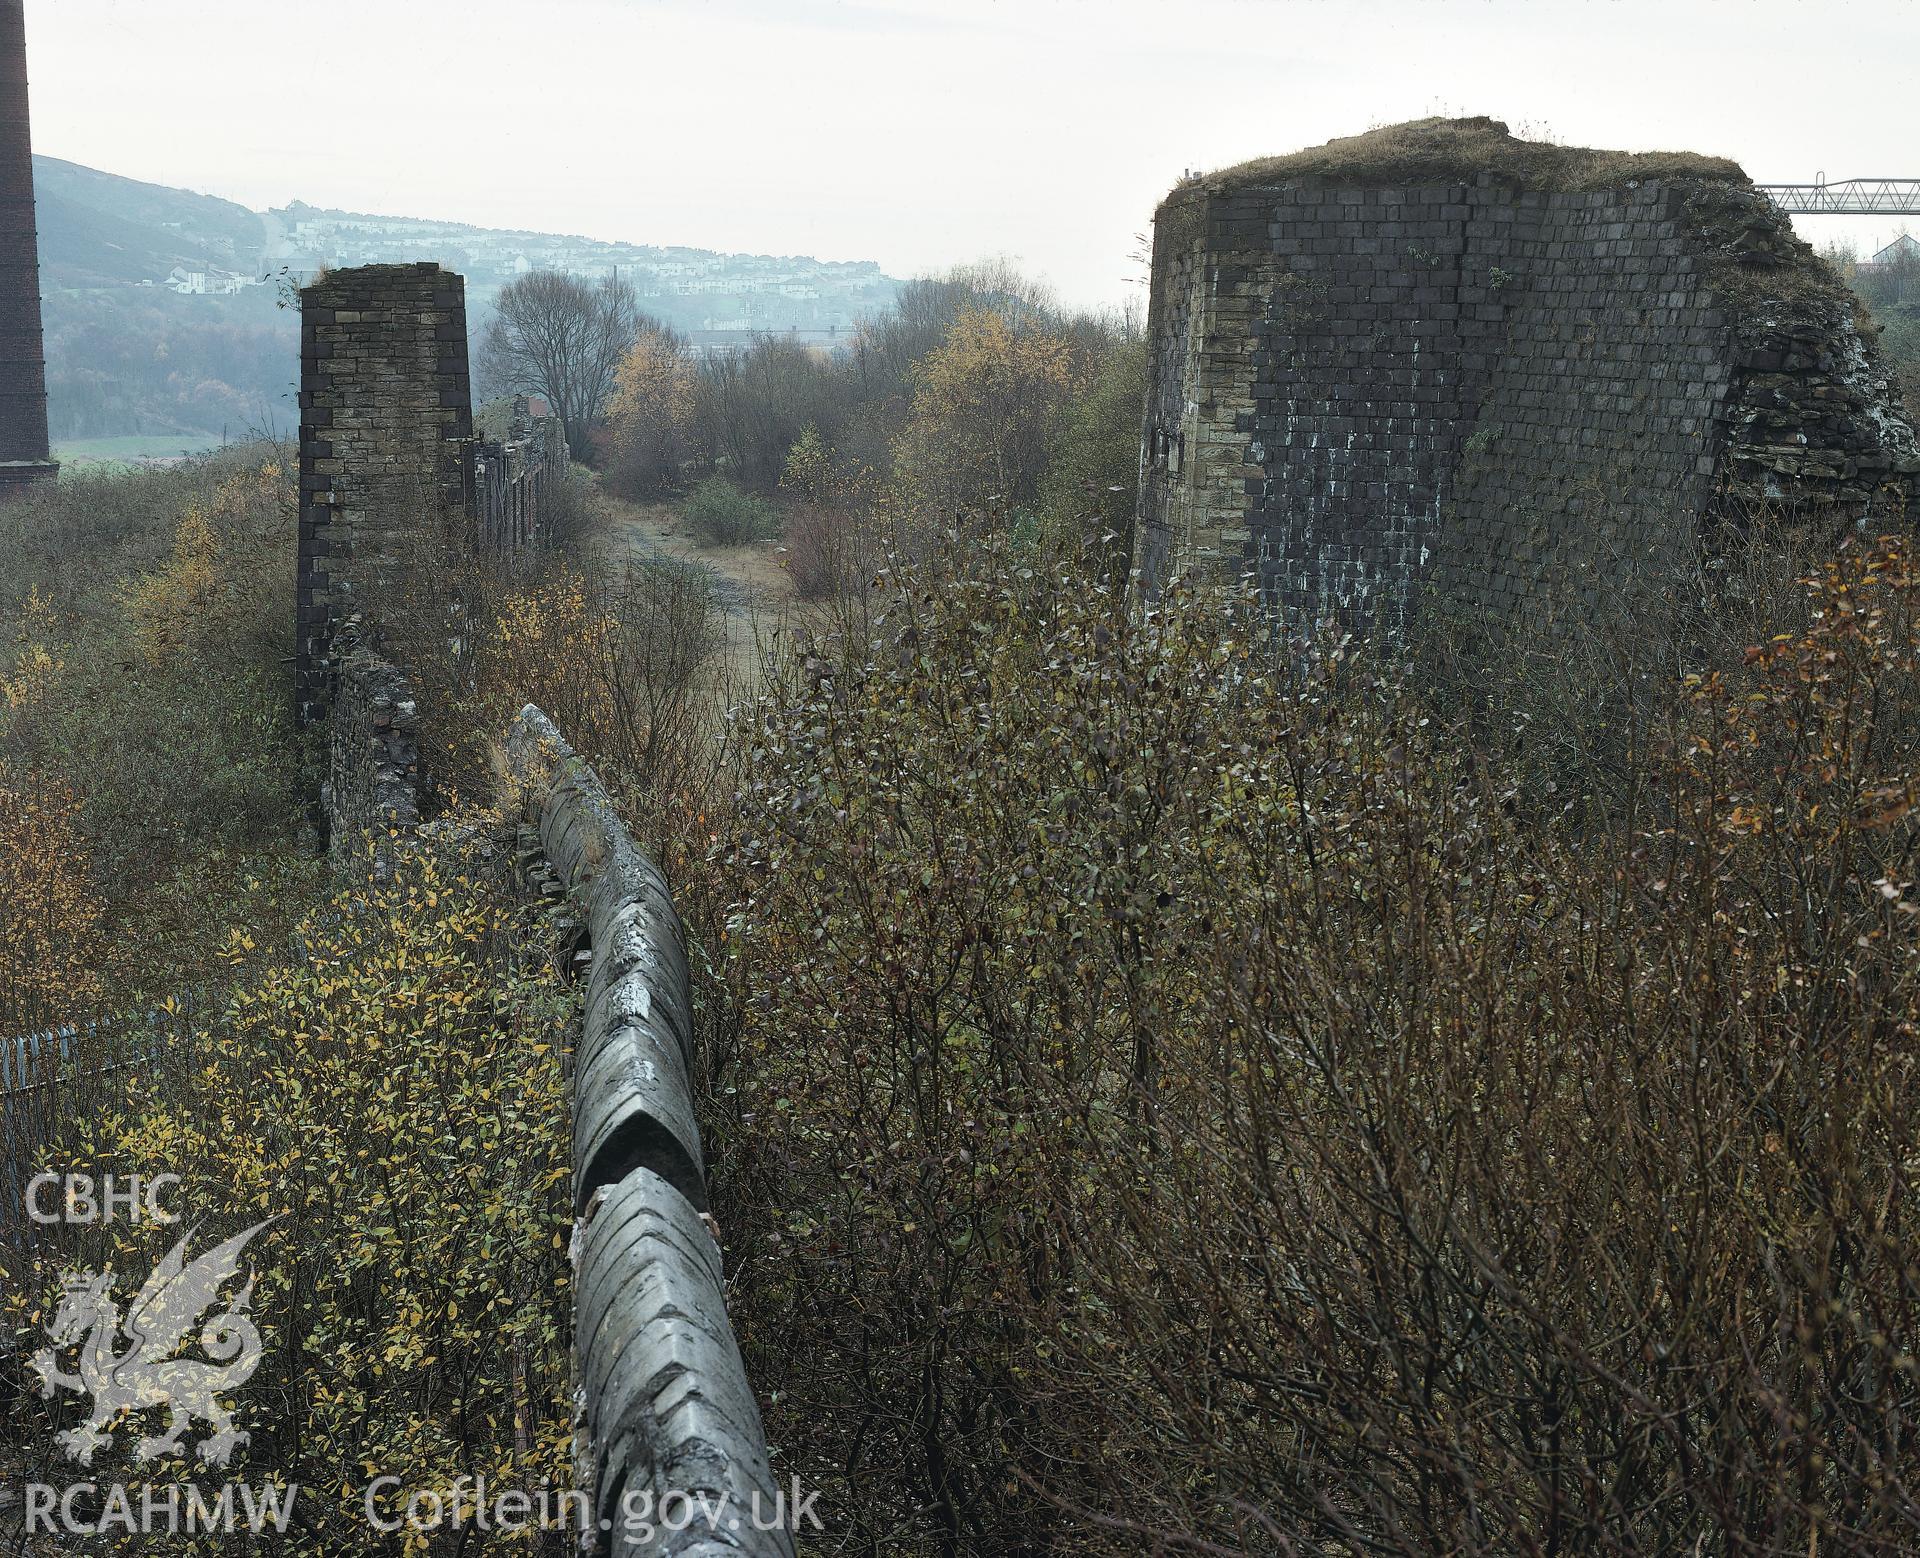 RCAHMW colour transparency of bridge abutments over Swansea canal at Morfa and Hay.